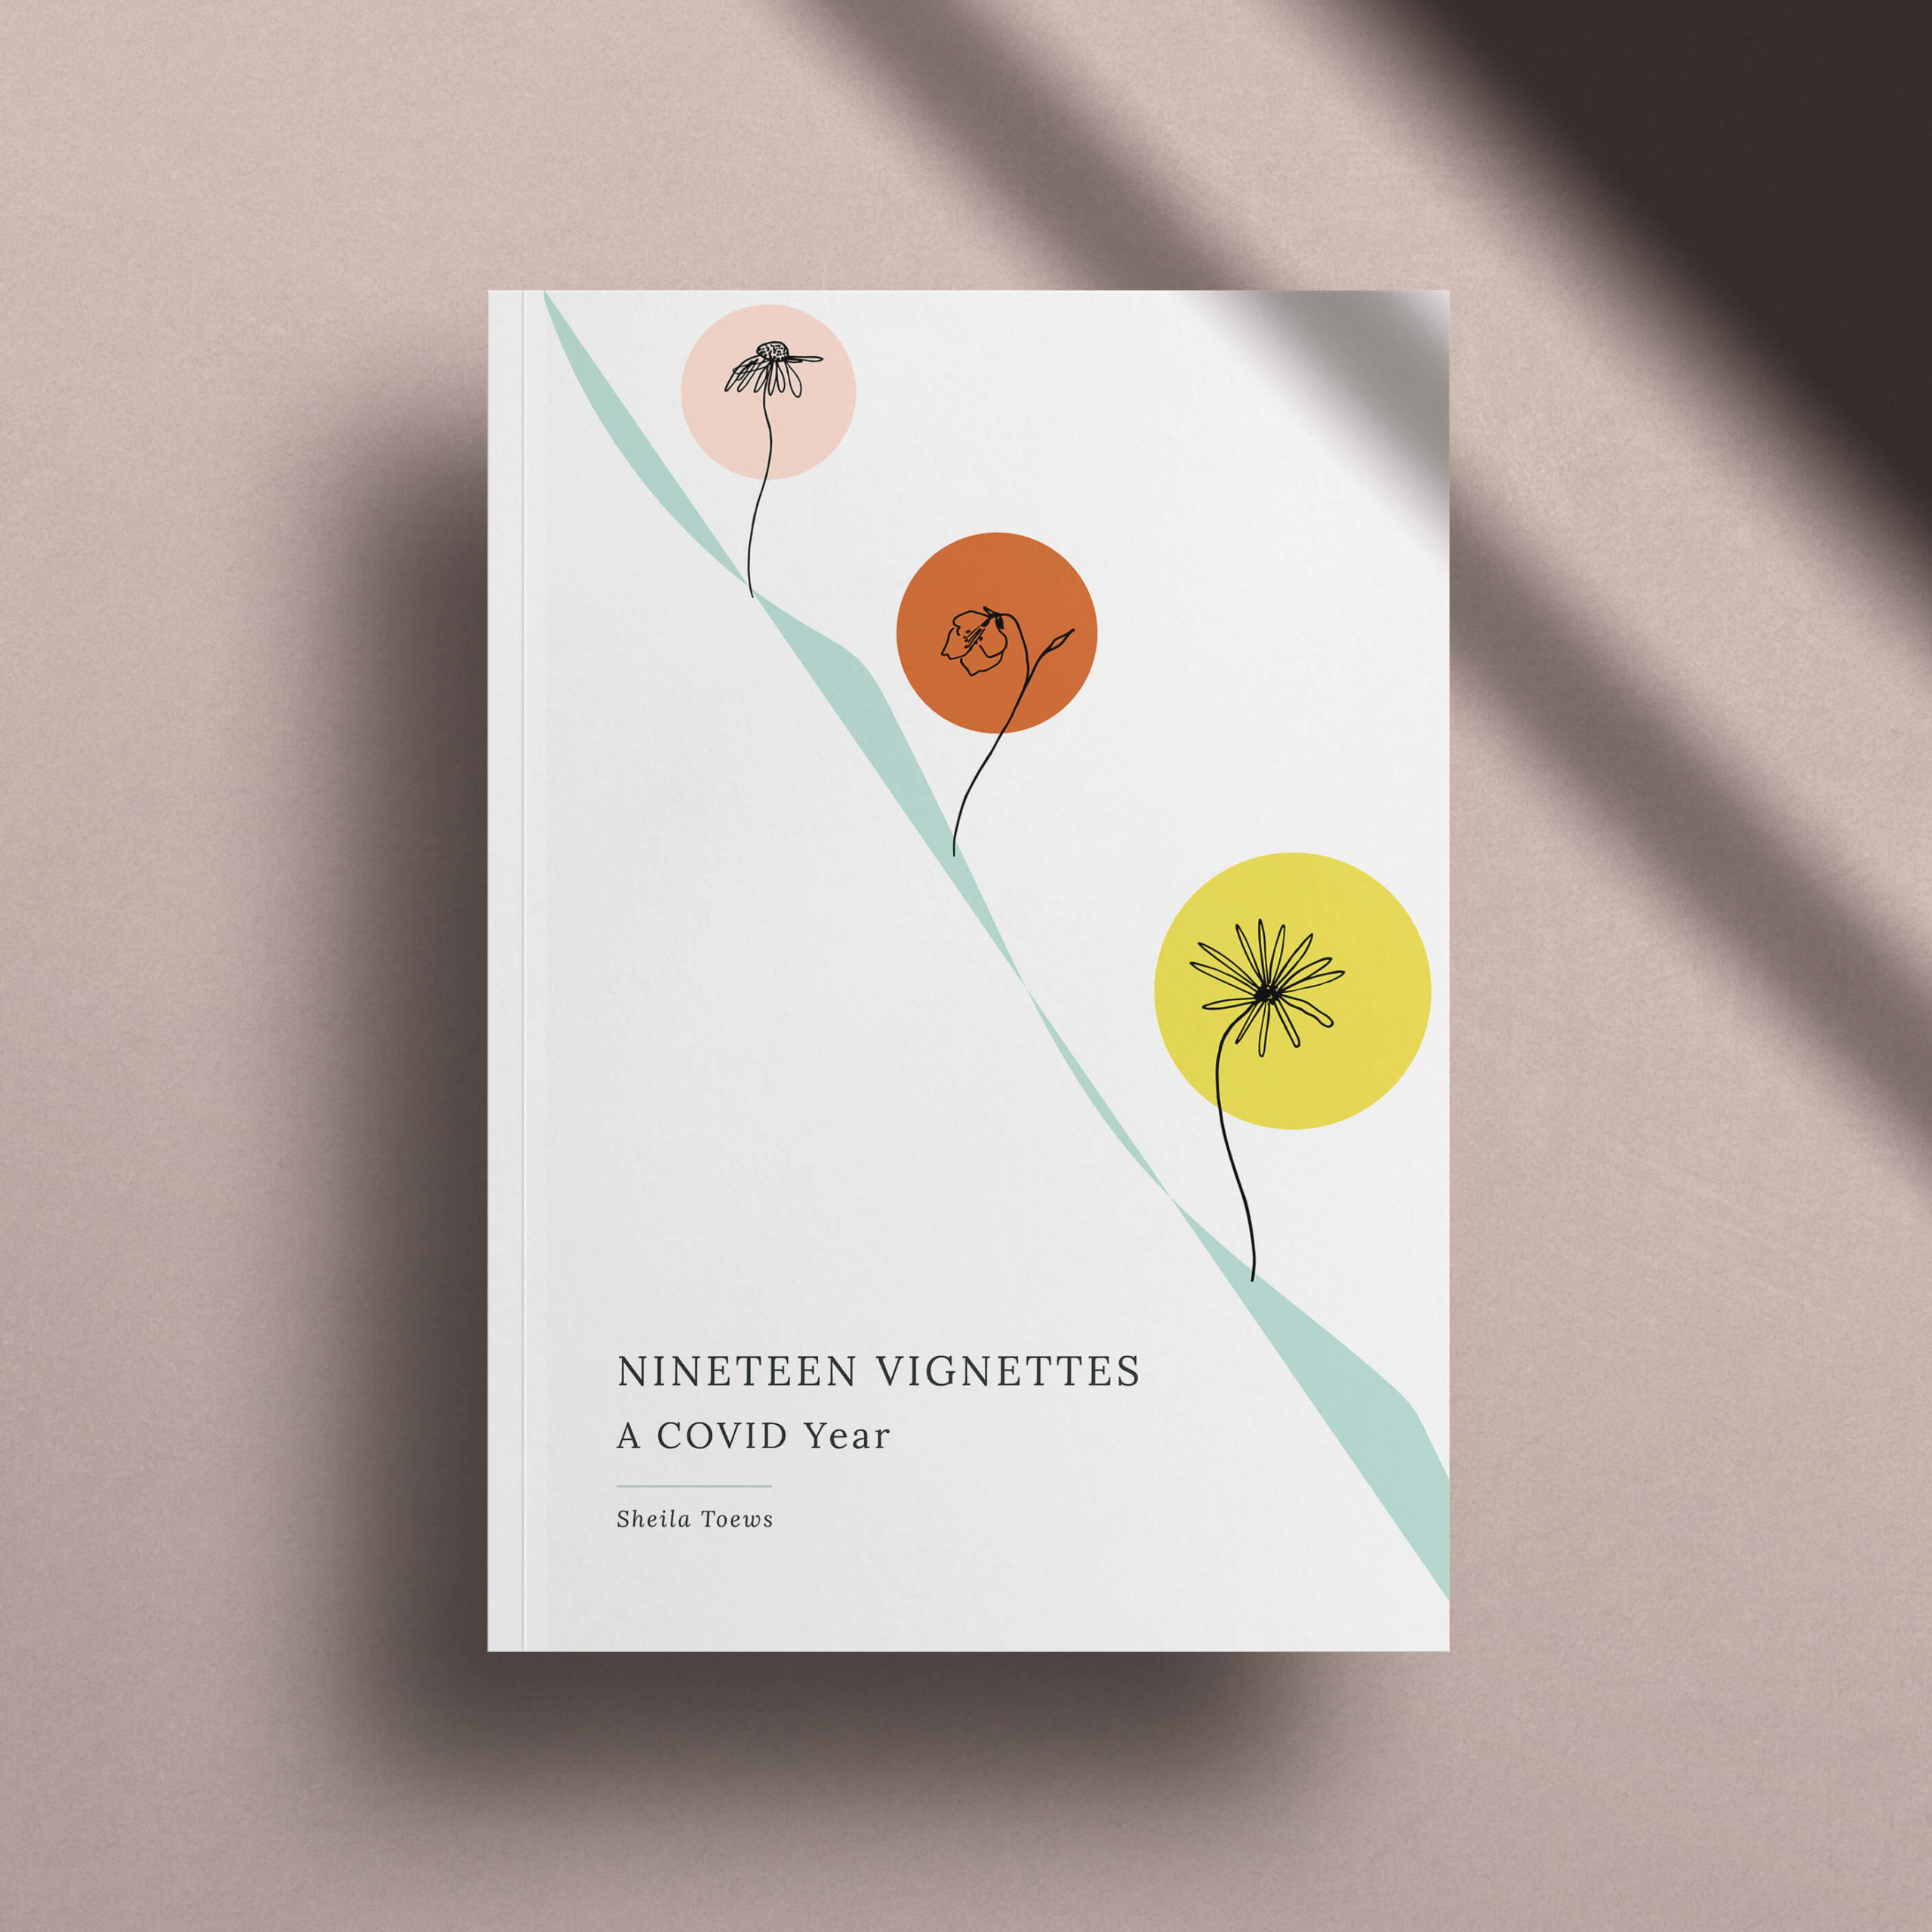 Book design cover options for a short story collection featuring Manitoba wildflowers